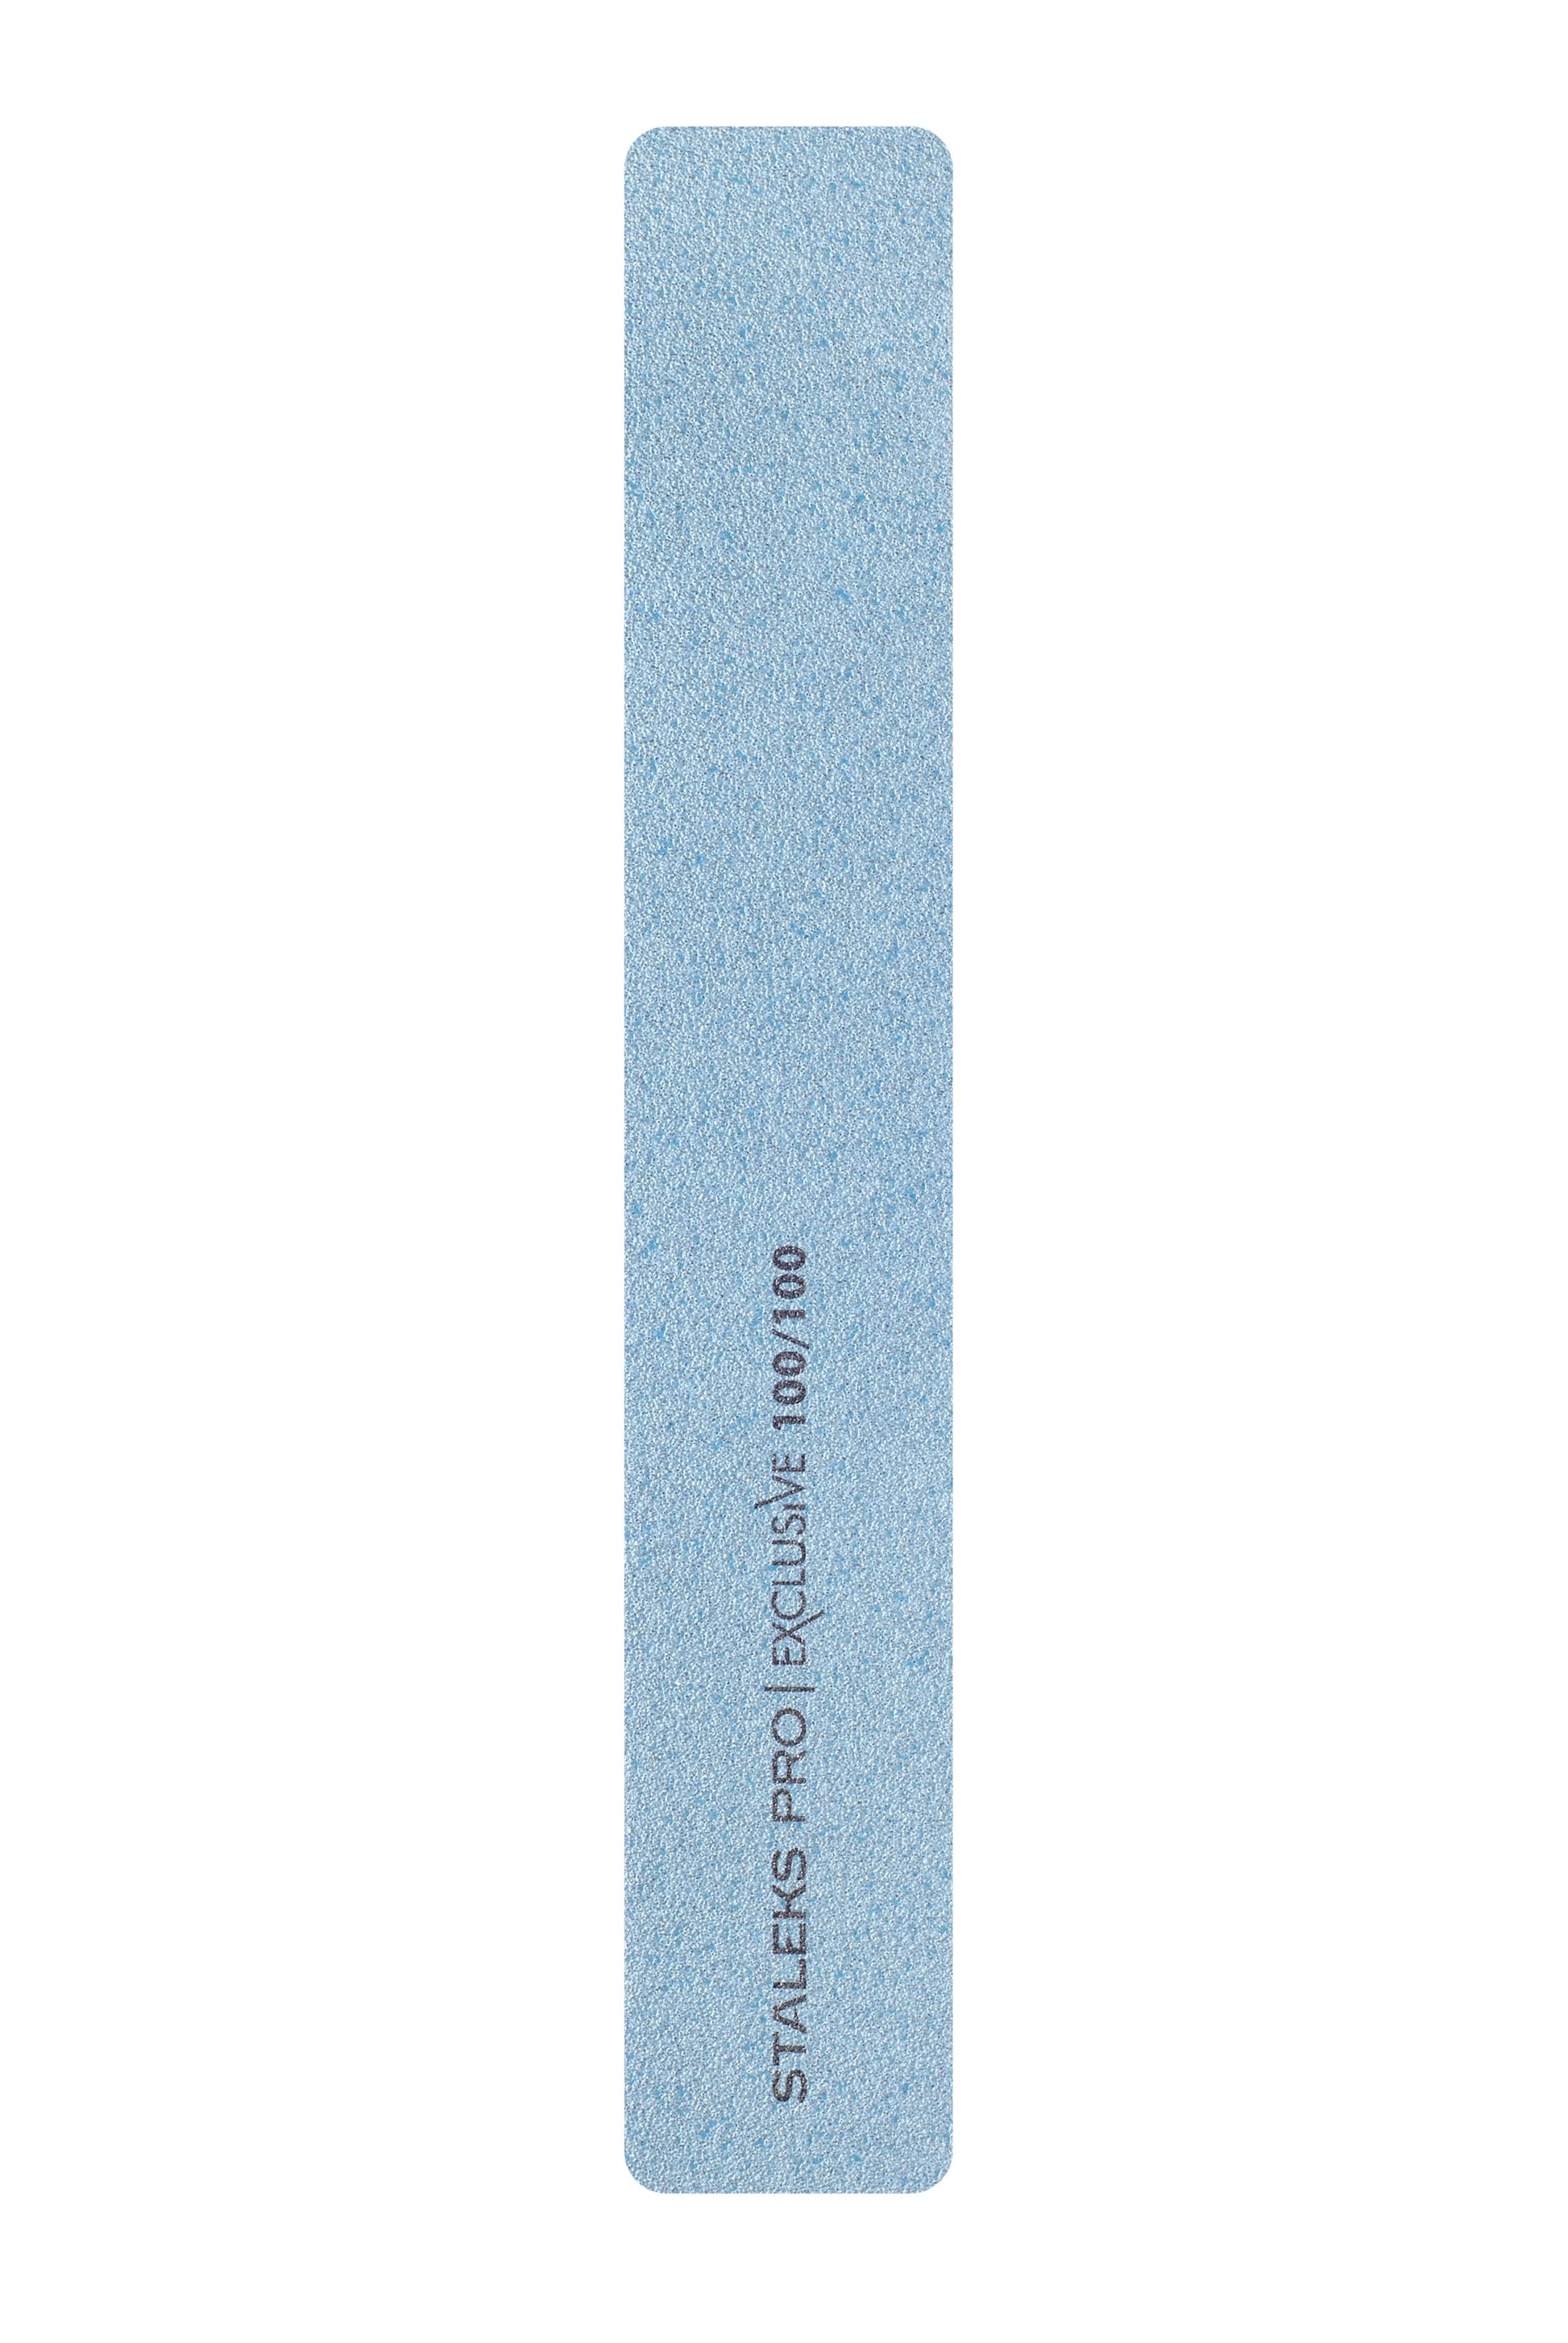 STALEKS-100/100grit Mineral straight nail file EXCLUSIVE-3